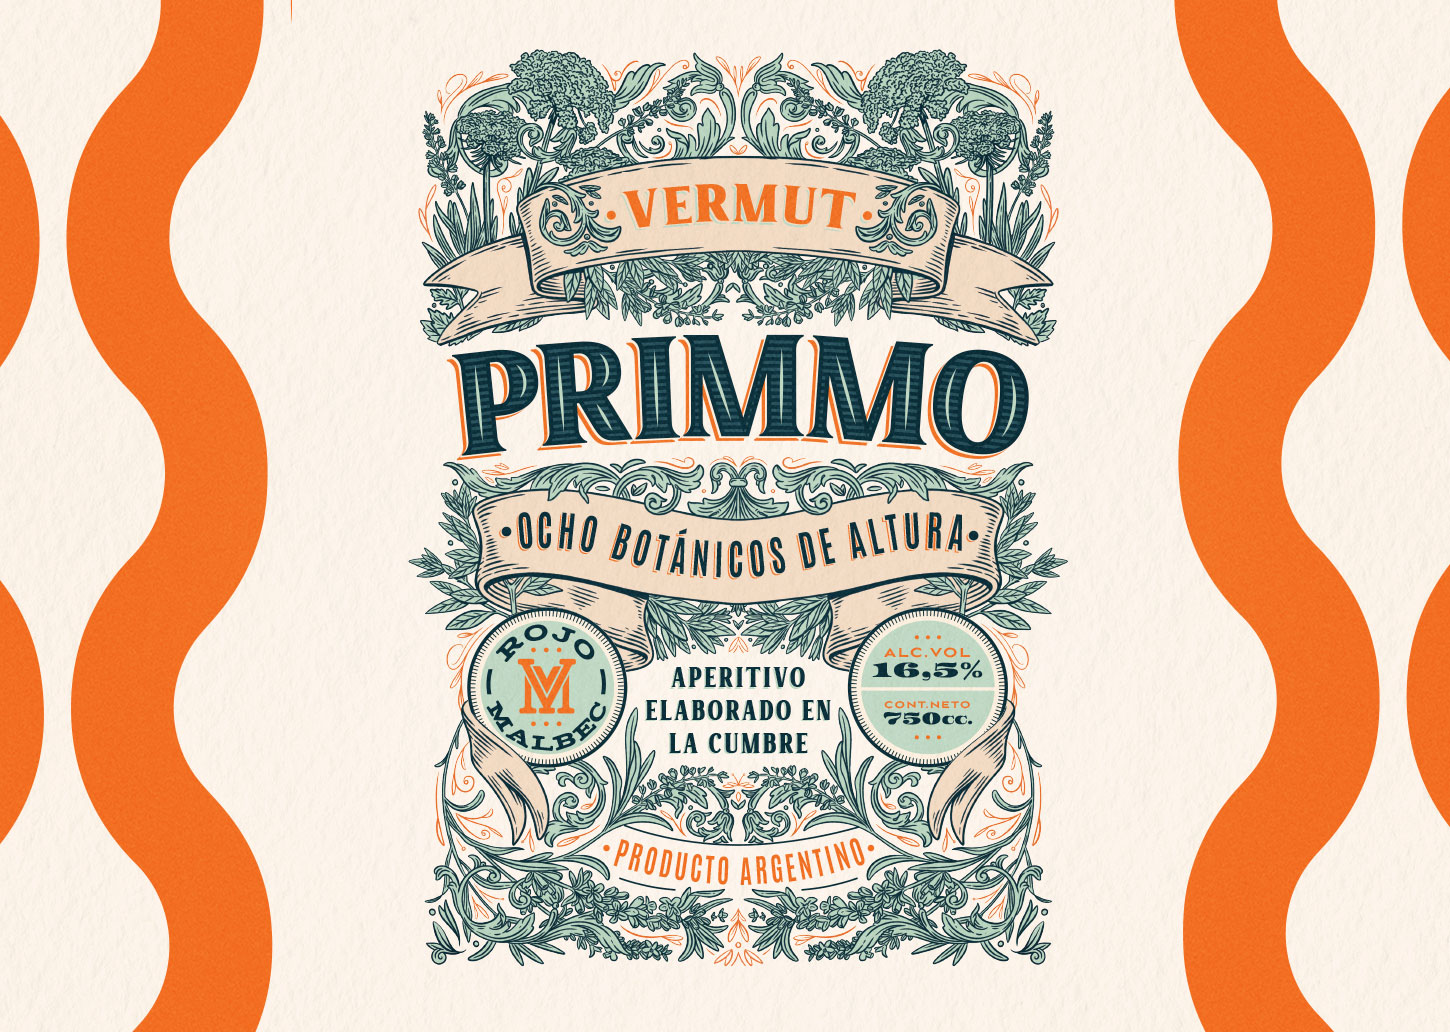 Design and Illustration for Primmo Malbec Vermouth by Emi Renzi